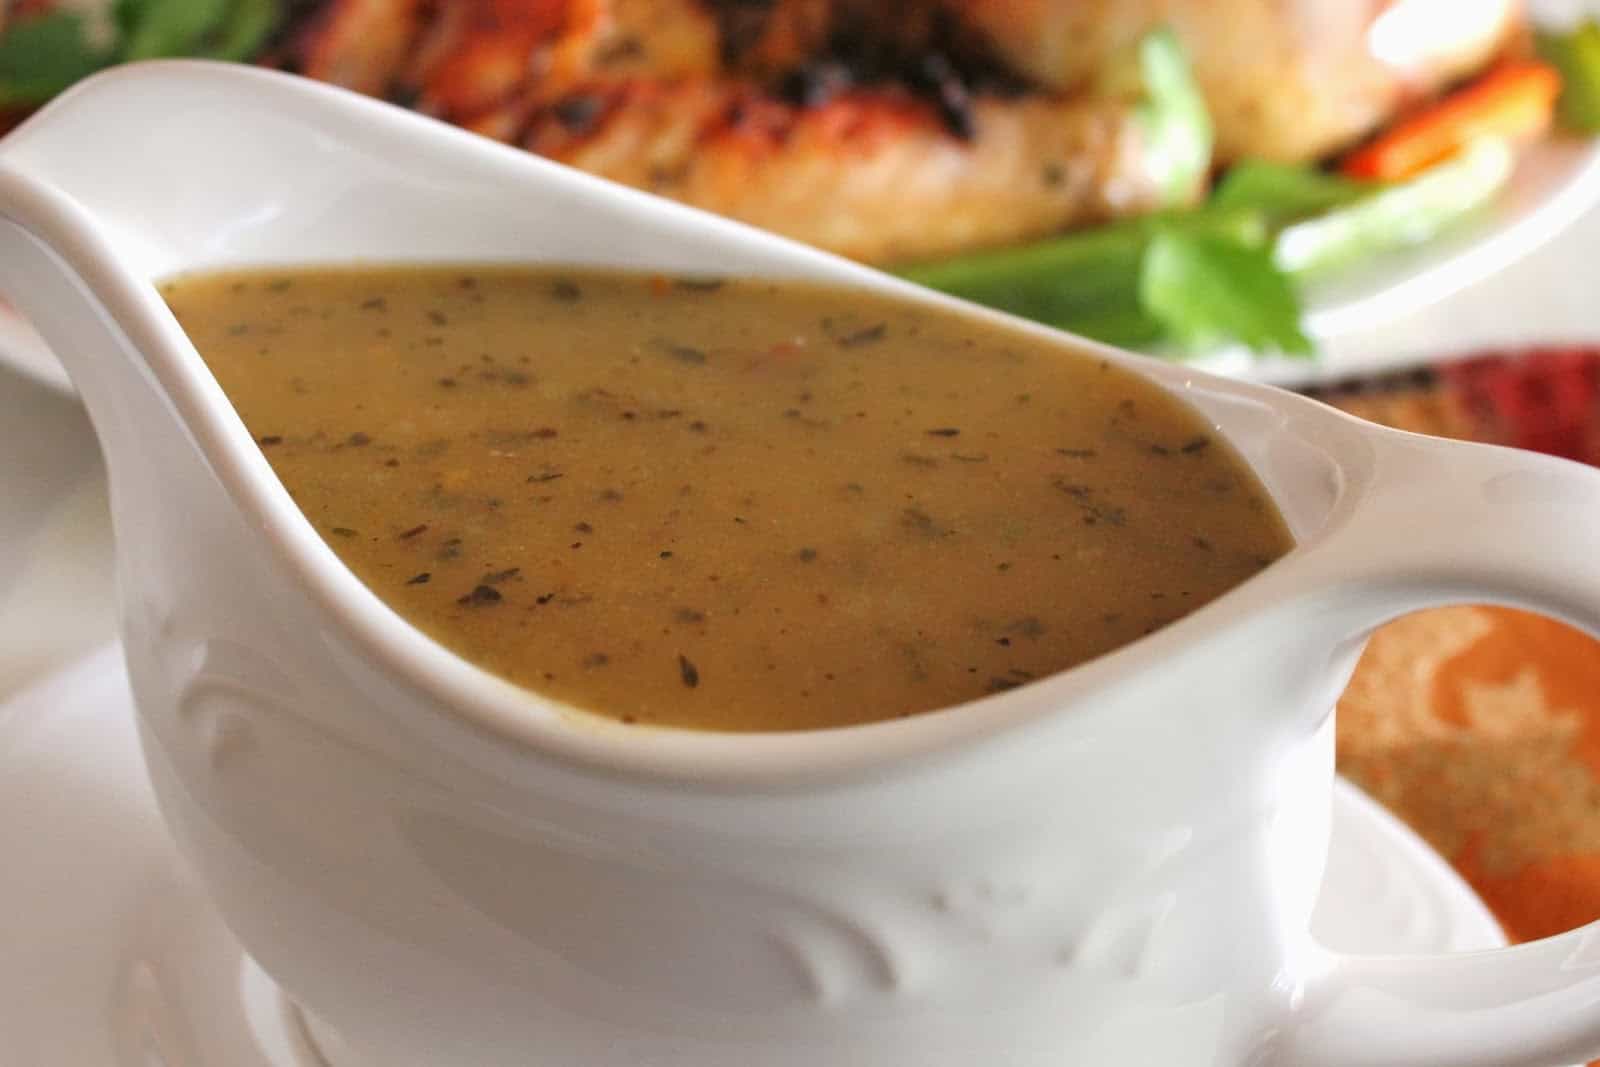 Perfect homemade turkey gravy made without drippings